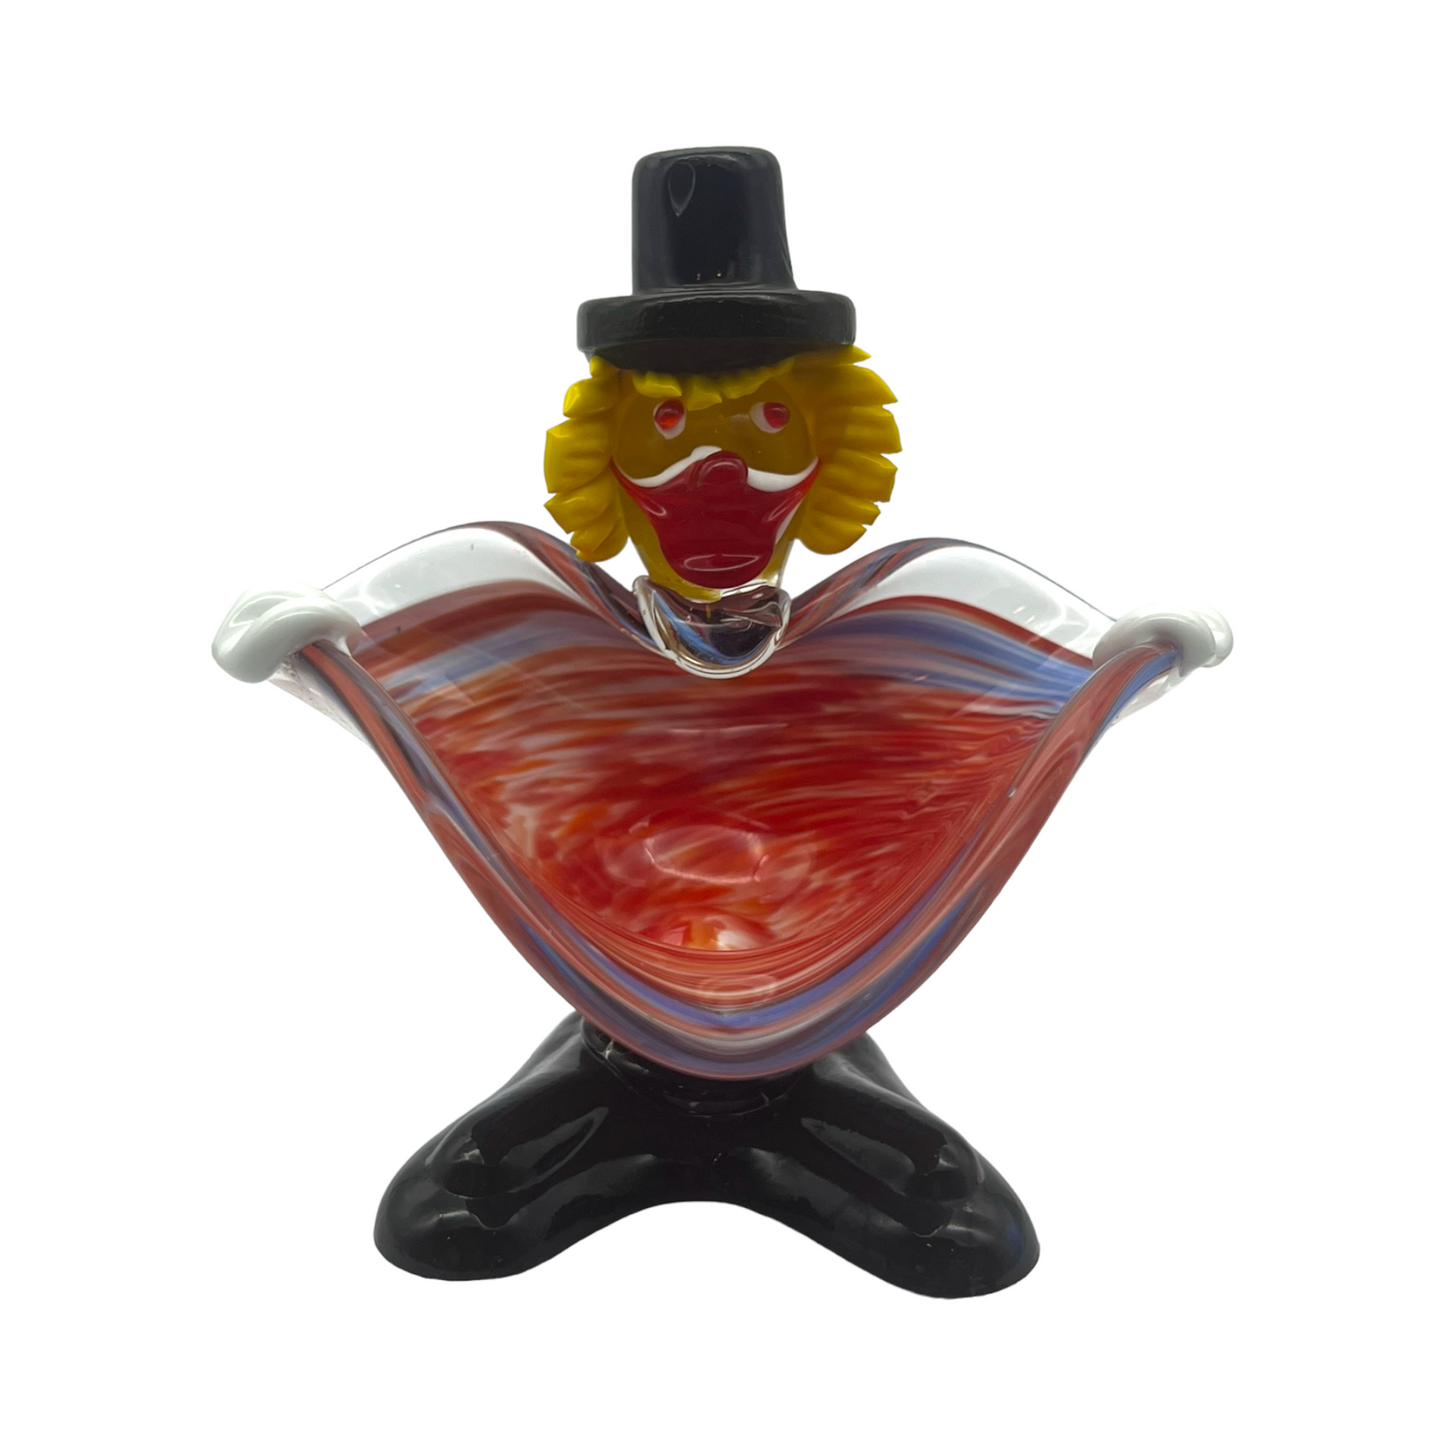 Whimsical Delights - Handcrafted Art Glass Clown Bowl (6")